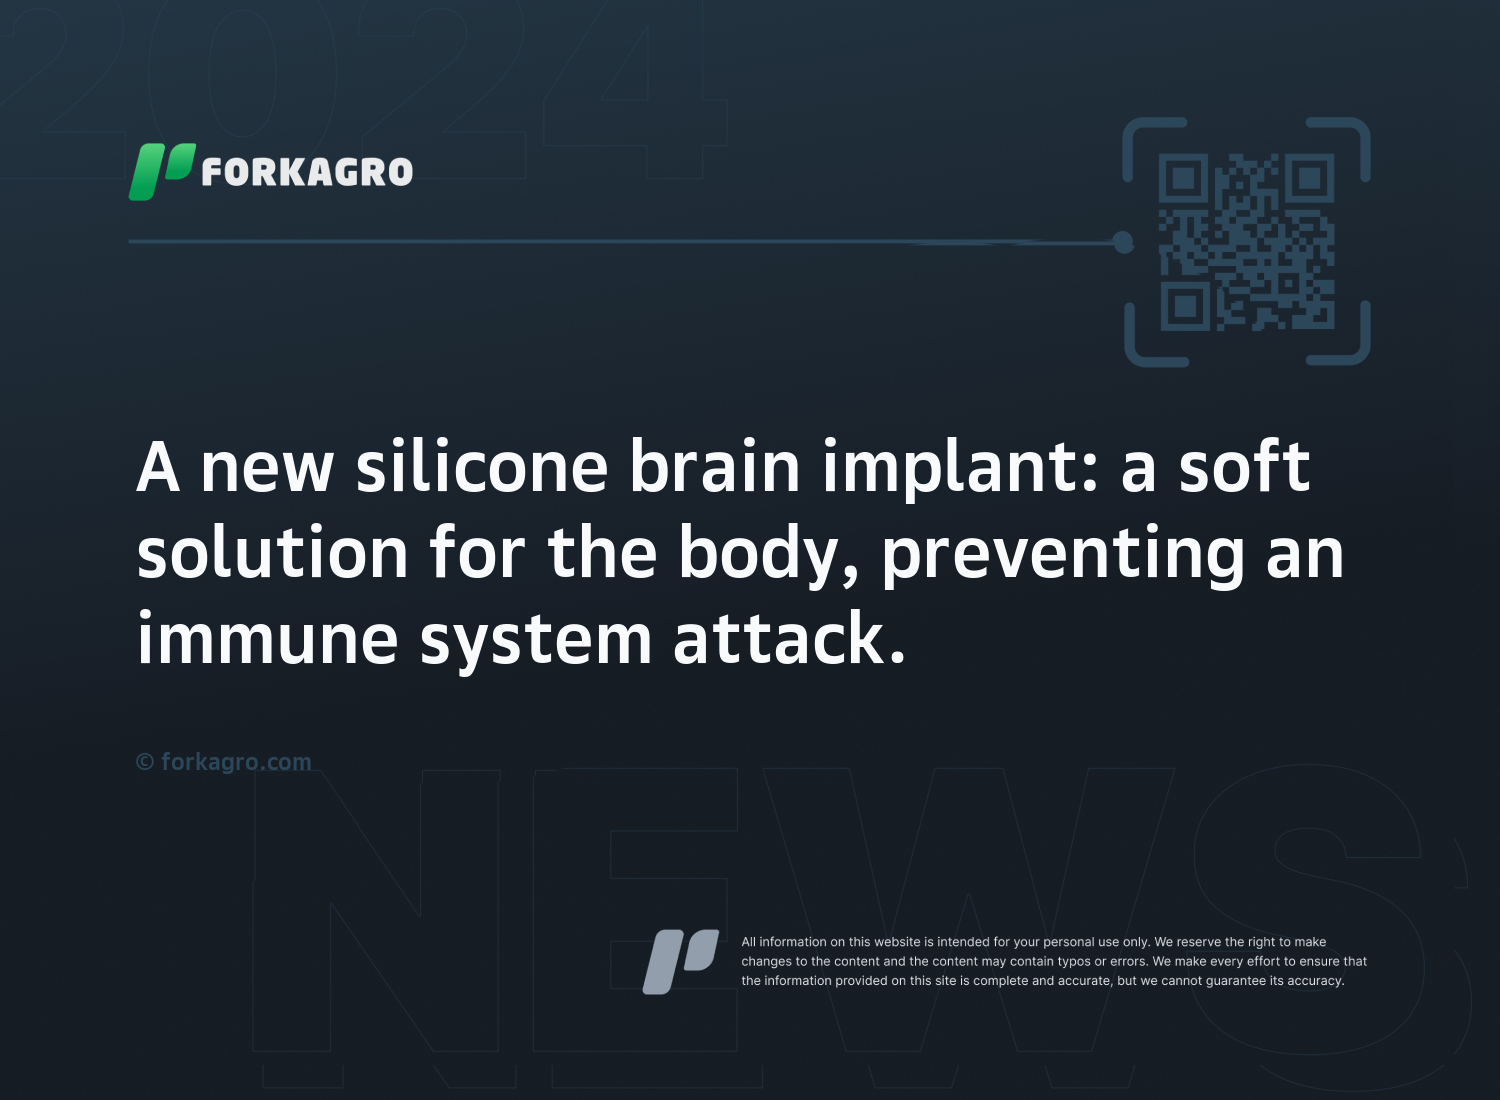 A new silicone brain implant: a soft solution for the body, preventing an immune system attack.